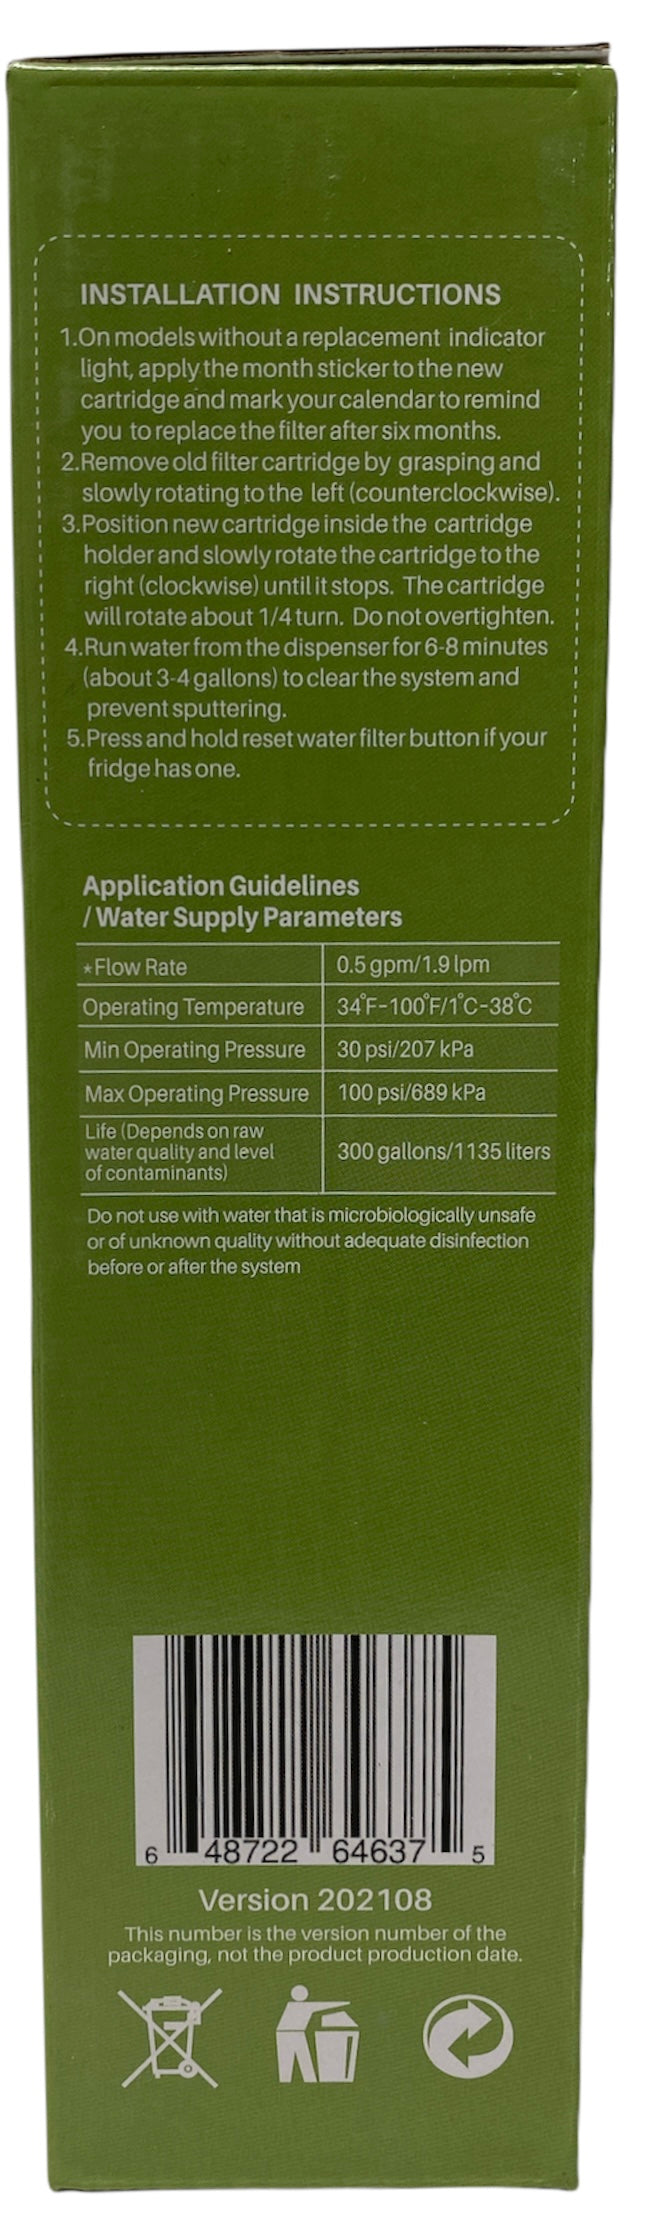 RWF1500A MSWF Refrigerator Water Filter IAPMO Certified Replacement for GE MSWF, 101820A, 101821B, RWF1500A Refrigerator Water Filter